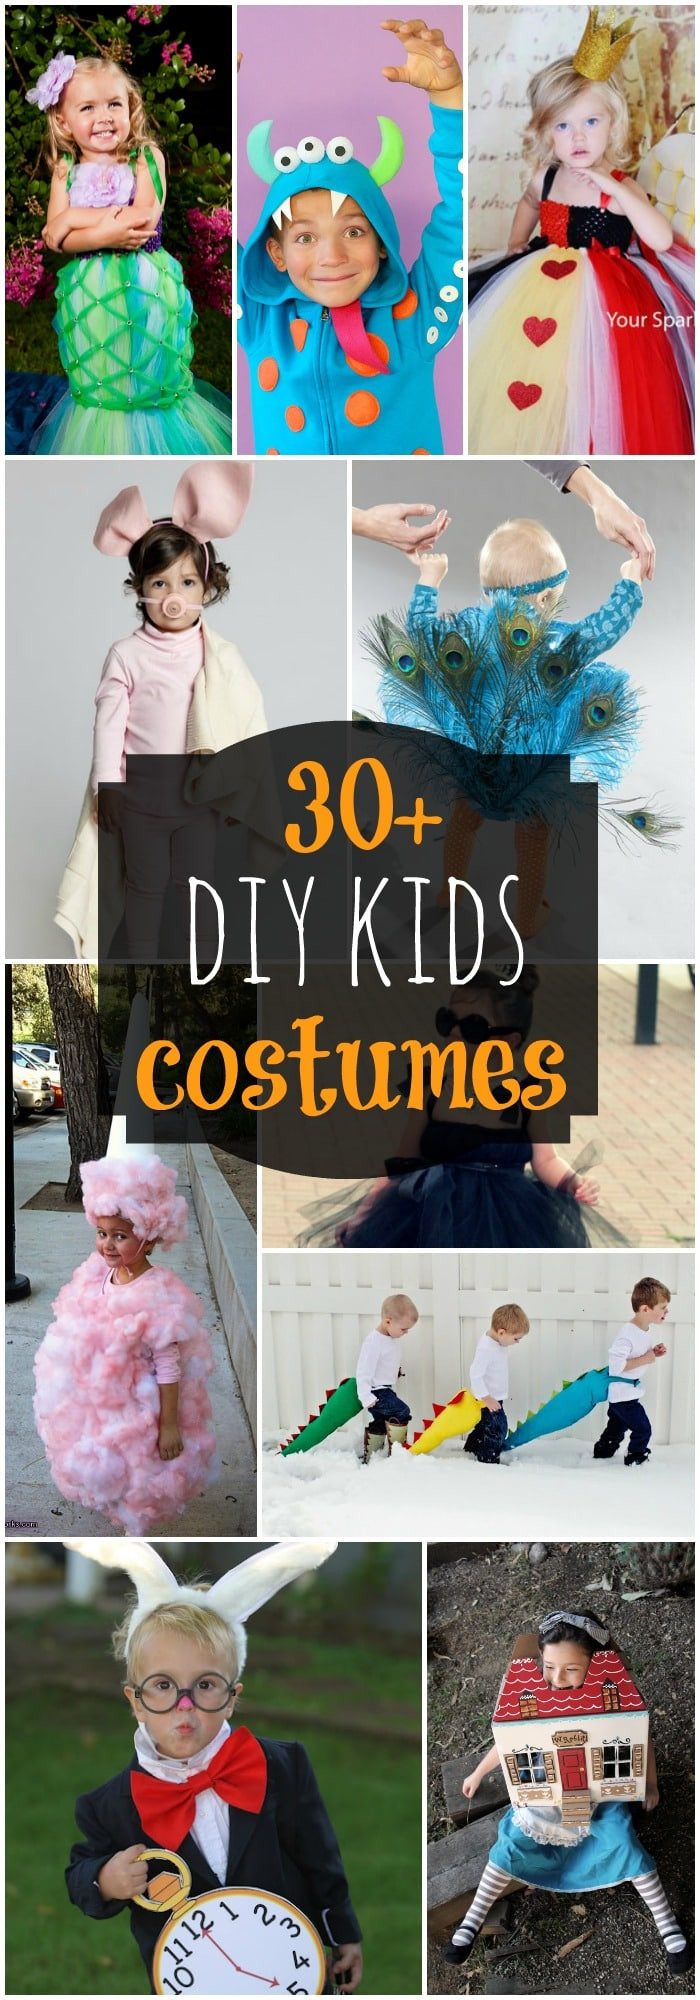 DIY Halloween Costume For Toddlers
 DIY Halloween Costumes for Kids